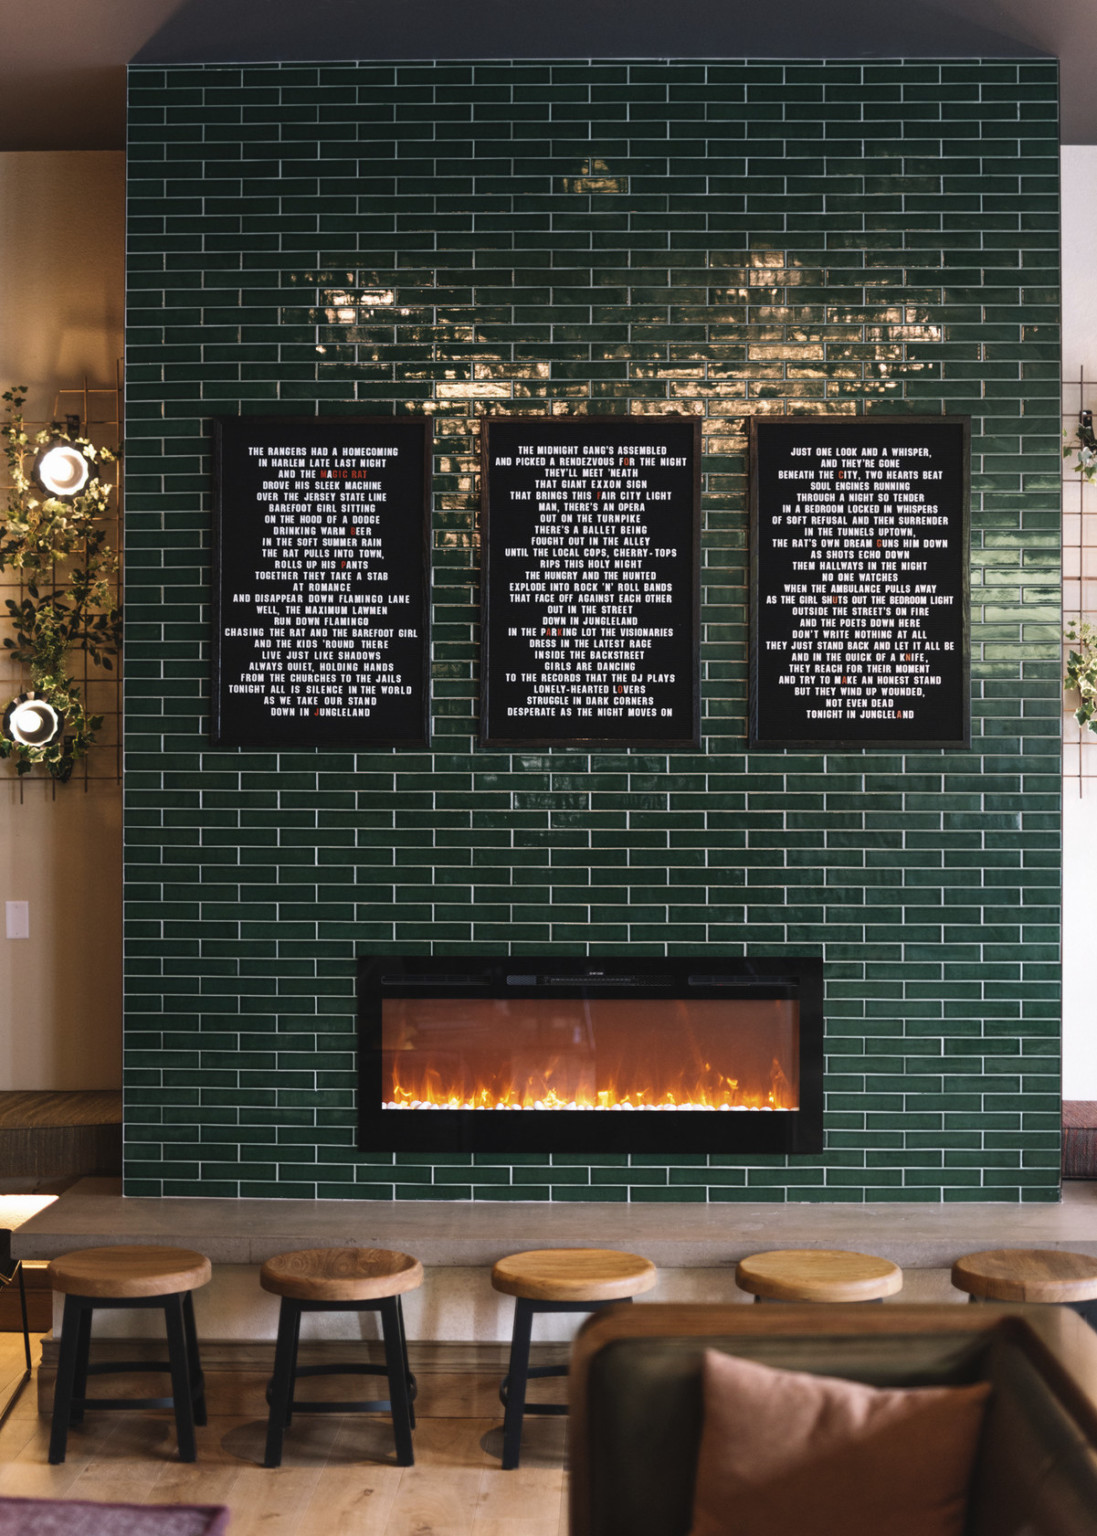 Green fireplace closeup with 3 panels of white words on black canvas. Stools in front of fire. White walls on side with art